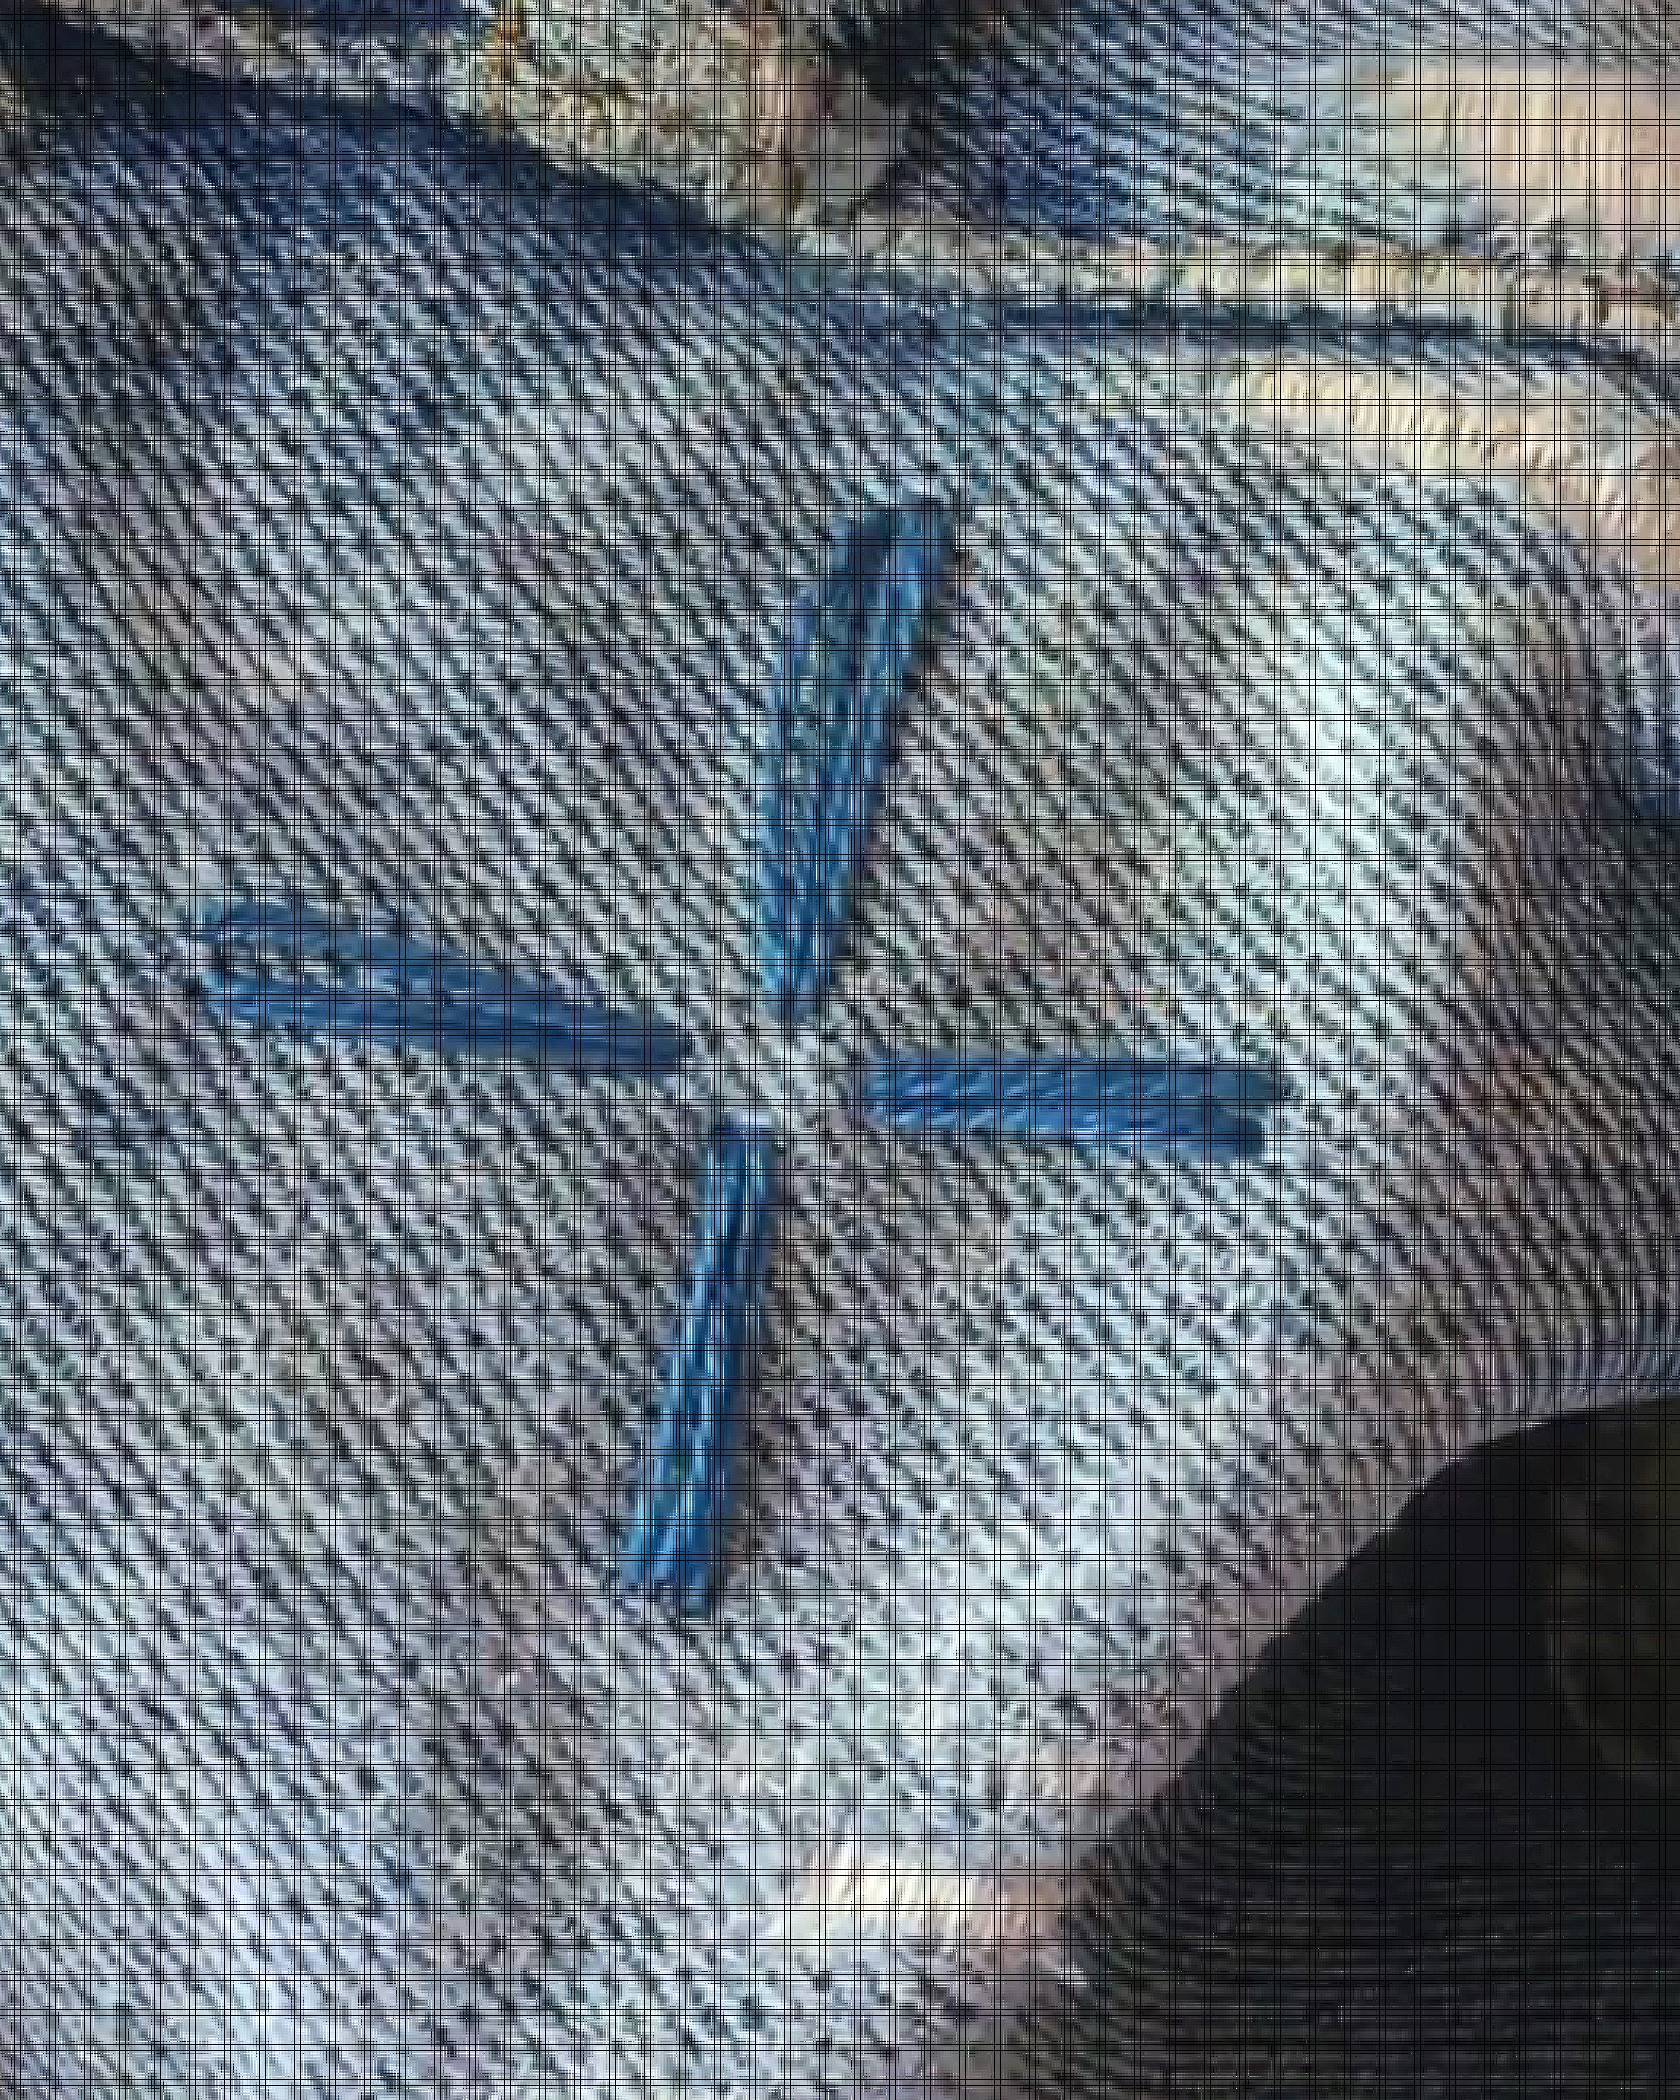 four petals shape of cross on denim embroidered